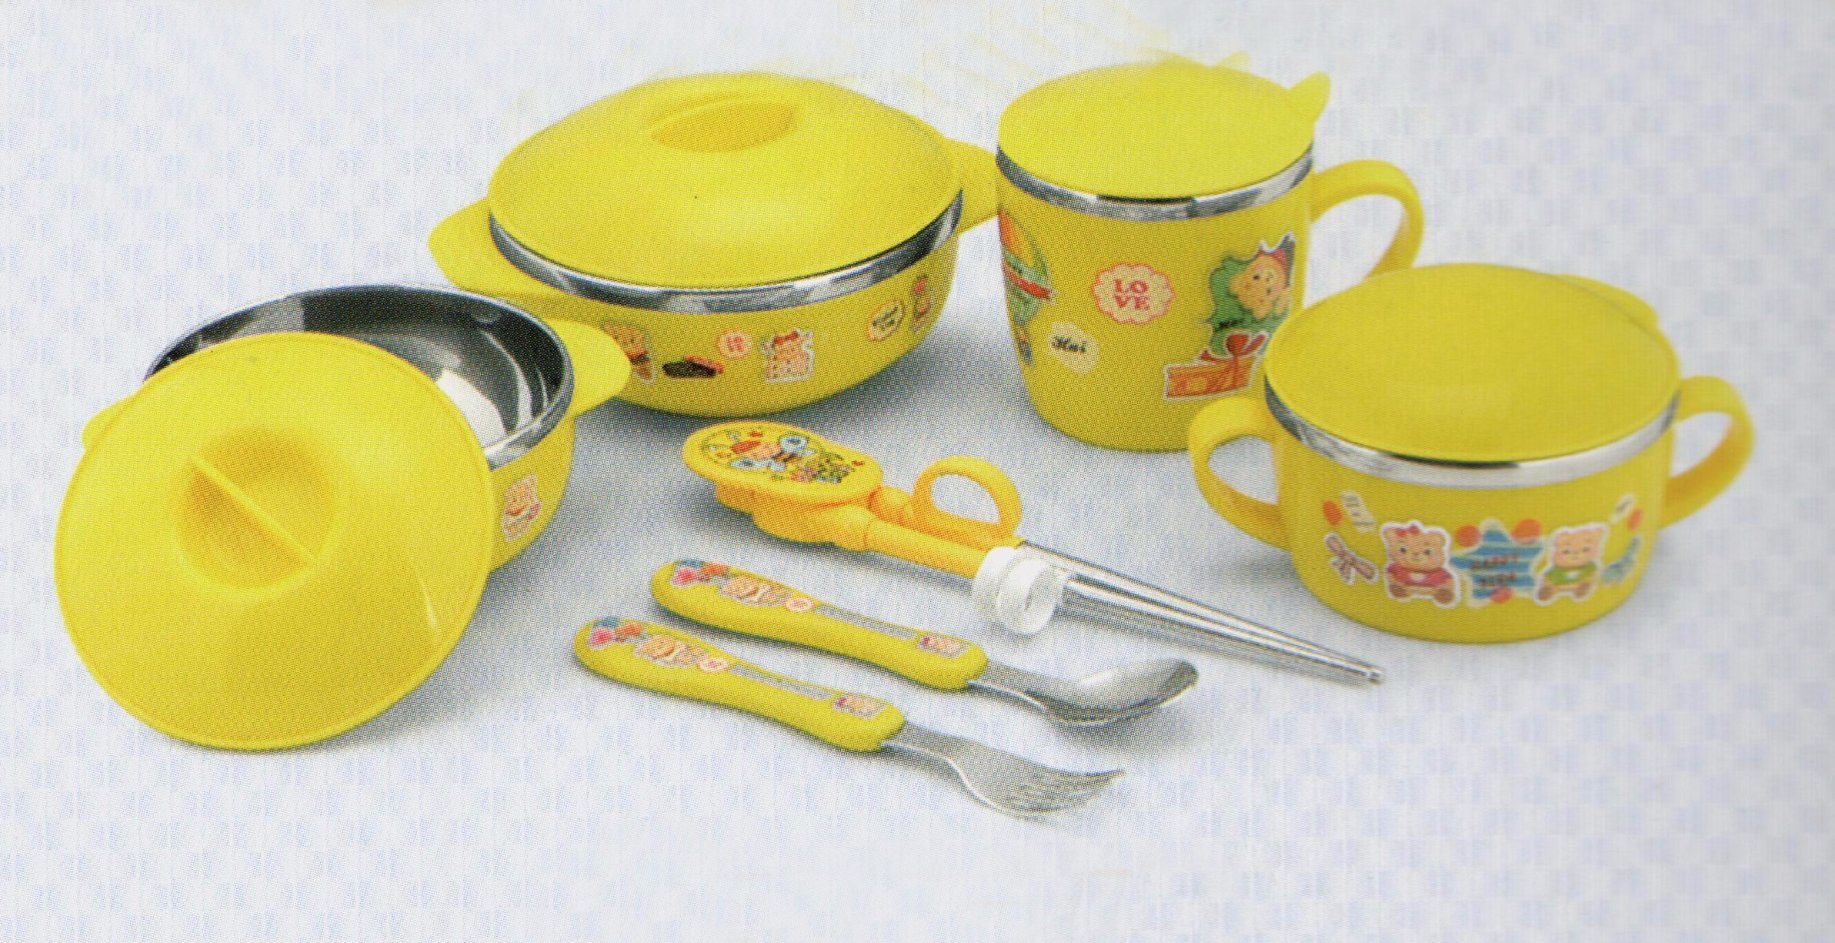 OEM Supply Wheat Straw Utensils -
 8PCS Stainless Steel Lunch Box with Handle – Long Prosper